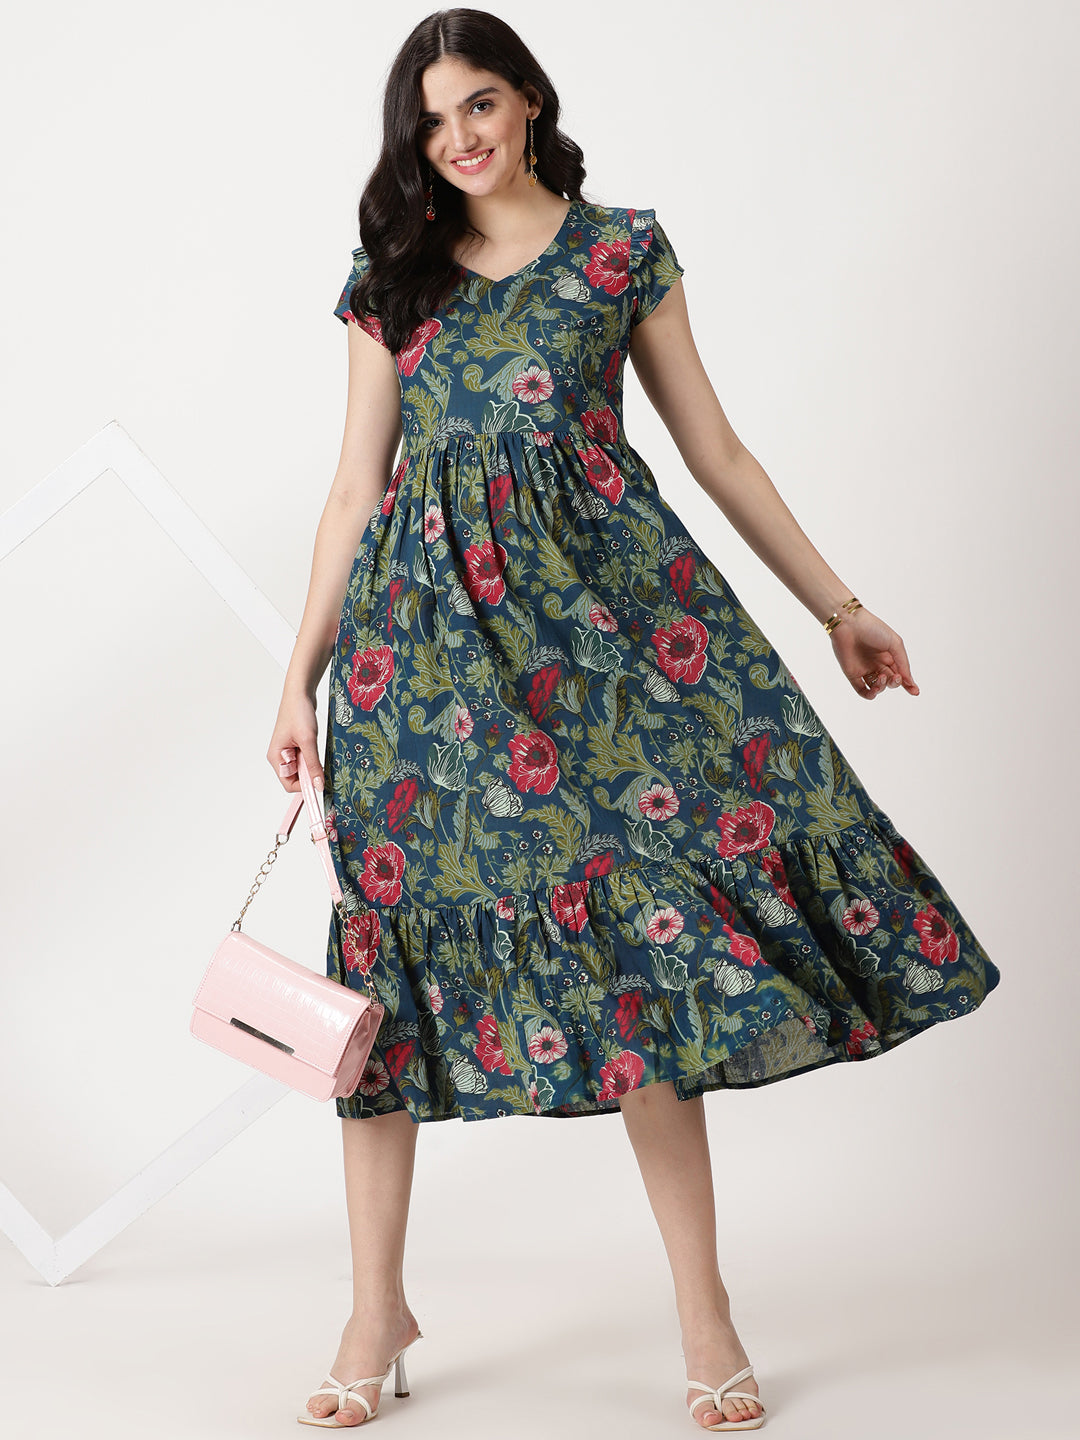 Stylish Cotton Frock Designs for Women to try this year